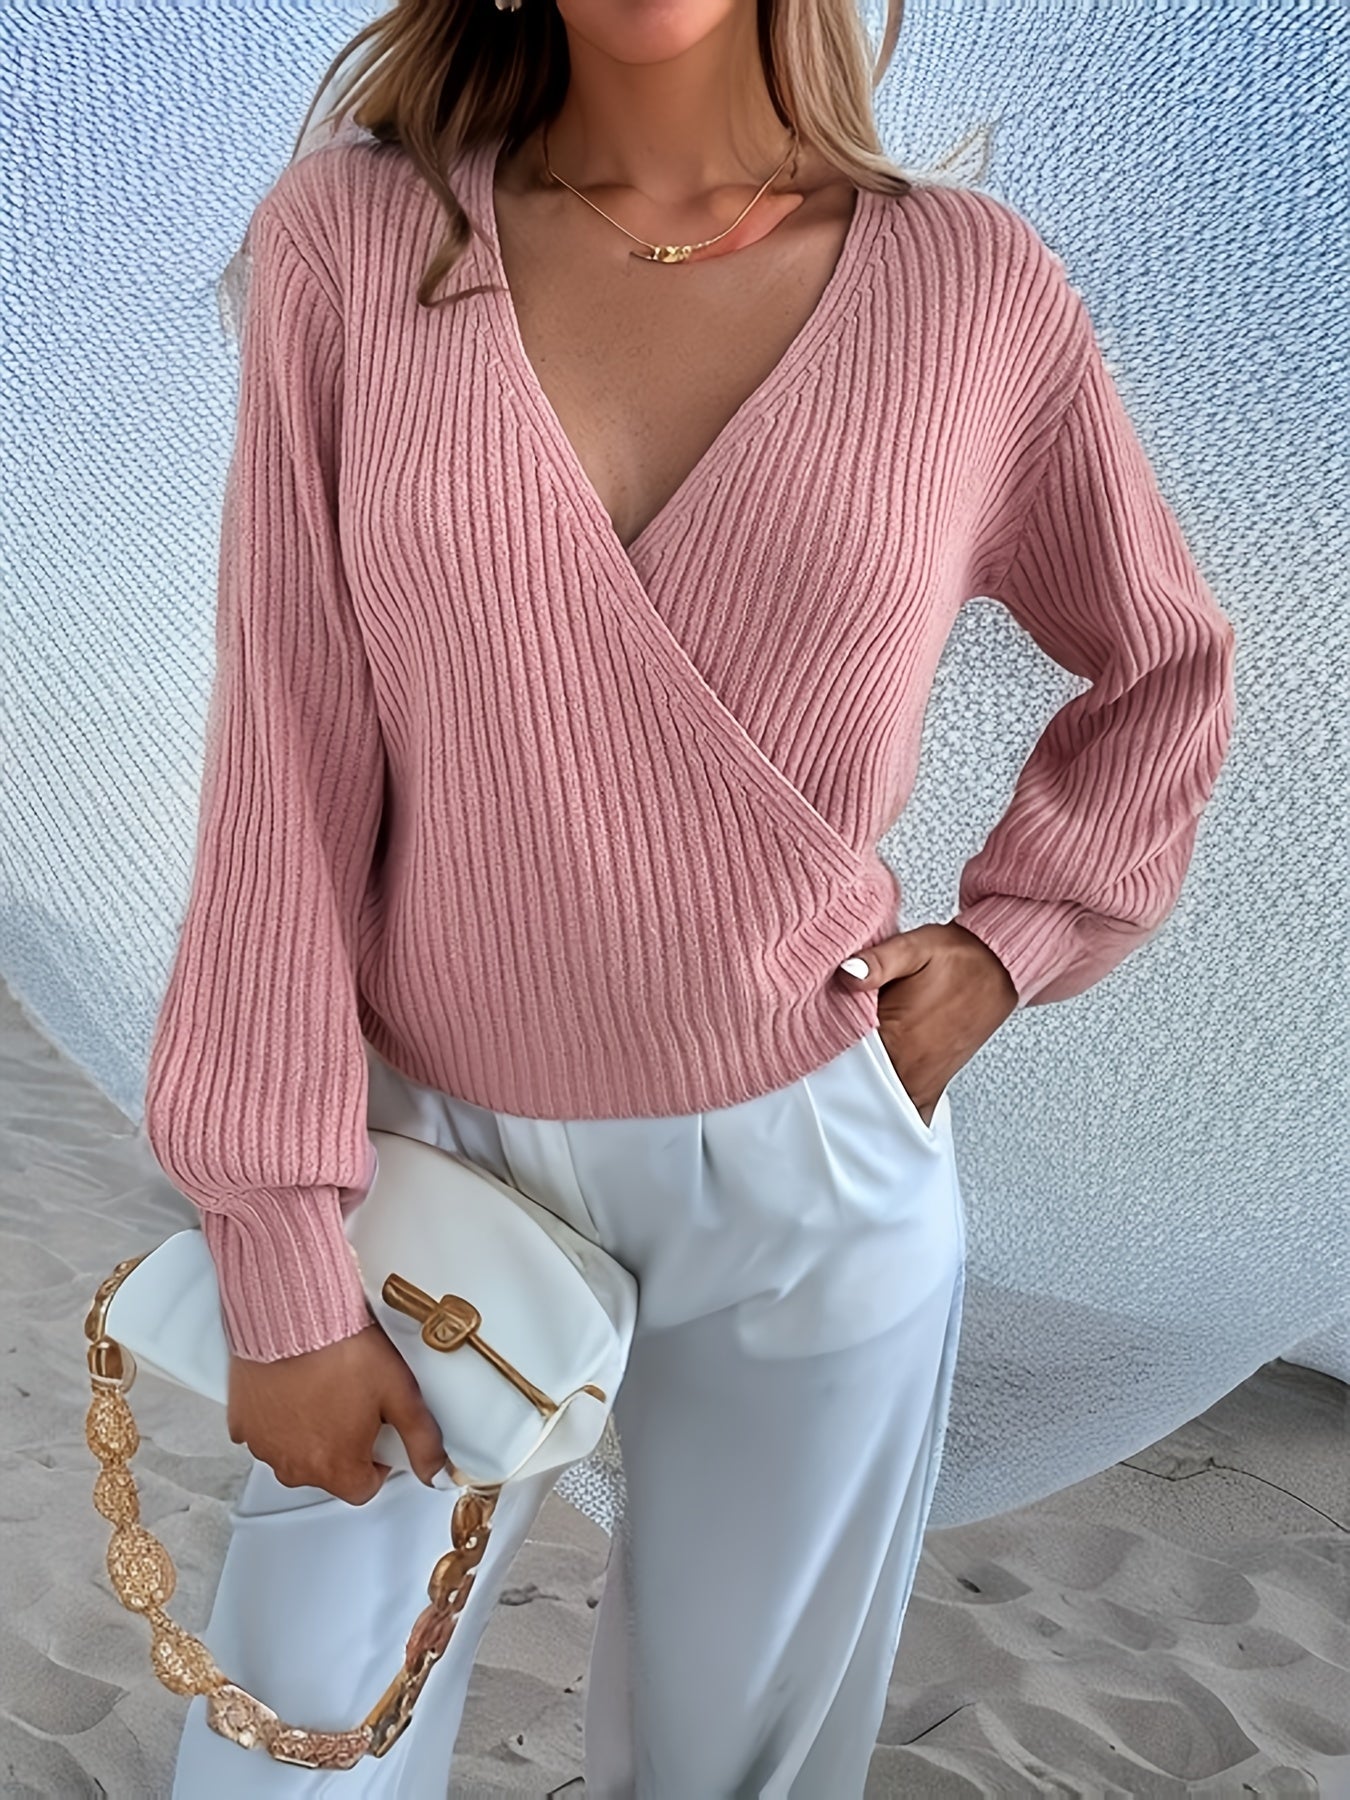 Antmvs Solid Surplice Neck Knitted Sweater, Casual Long Sleeve Fashion Sweater, Women's Clothing